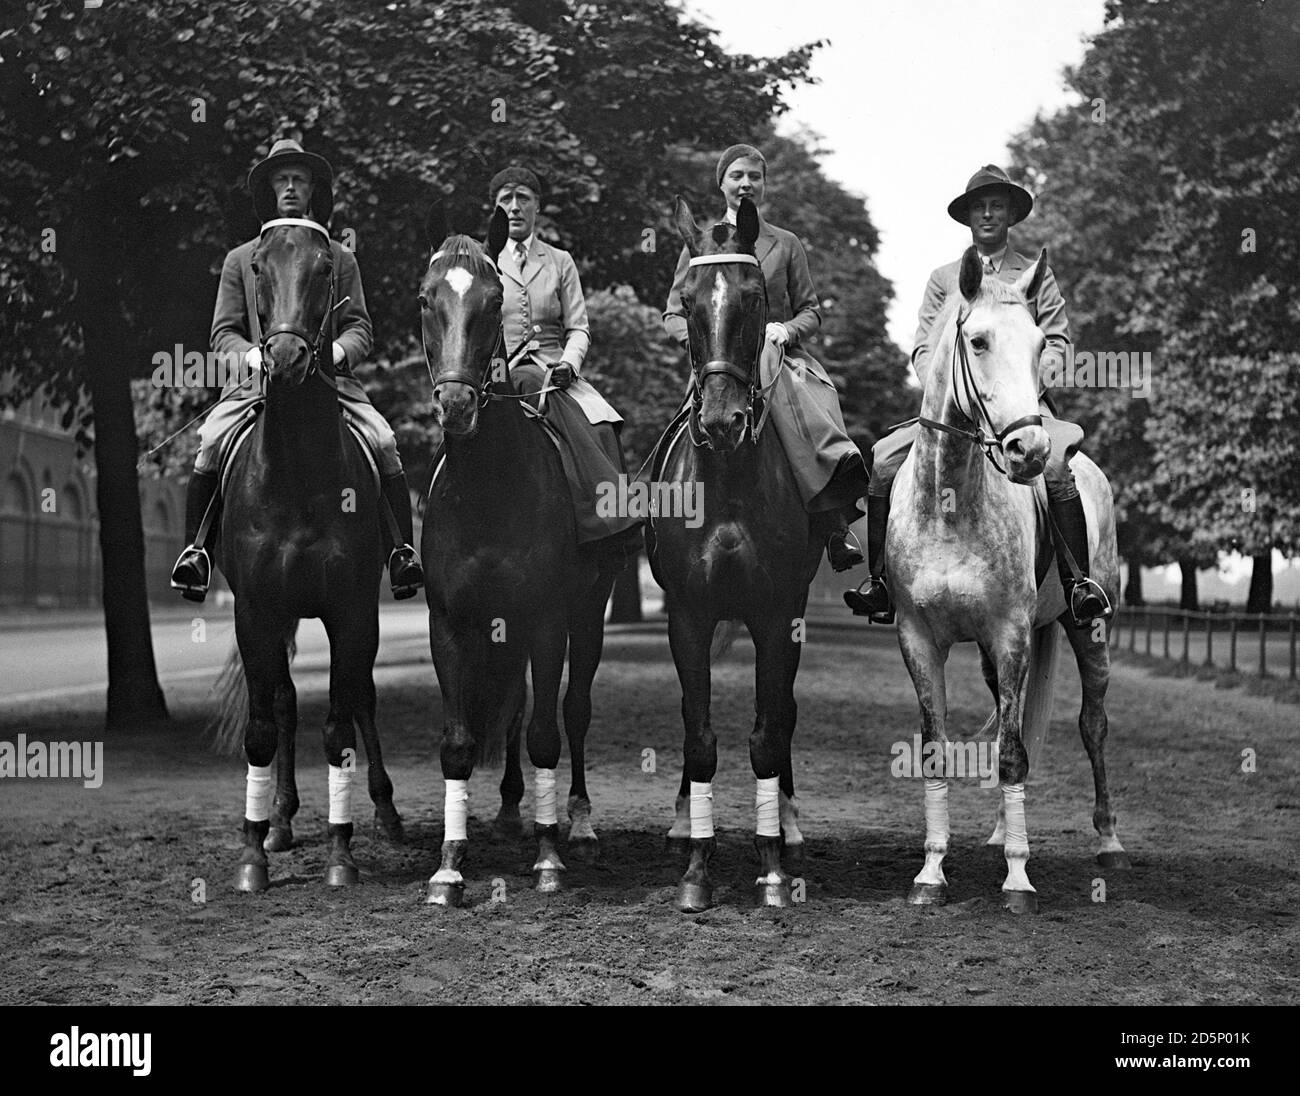 (L-R) Prince Castell of Castell, Mrs von Loebbecke, Mrs Duesing and Count Rothkirch, on their horses while exercising in the Row, Hyde Park, London. Frau Duesing, of Hamburg, Germany, has arrived in London with three other German riders to compete at the International Horse Show at Olympia in London. Stock Photo